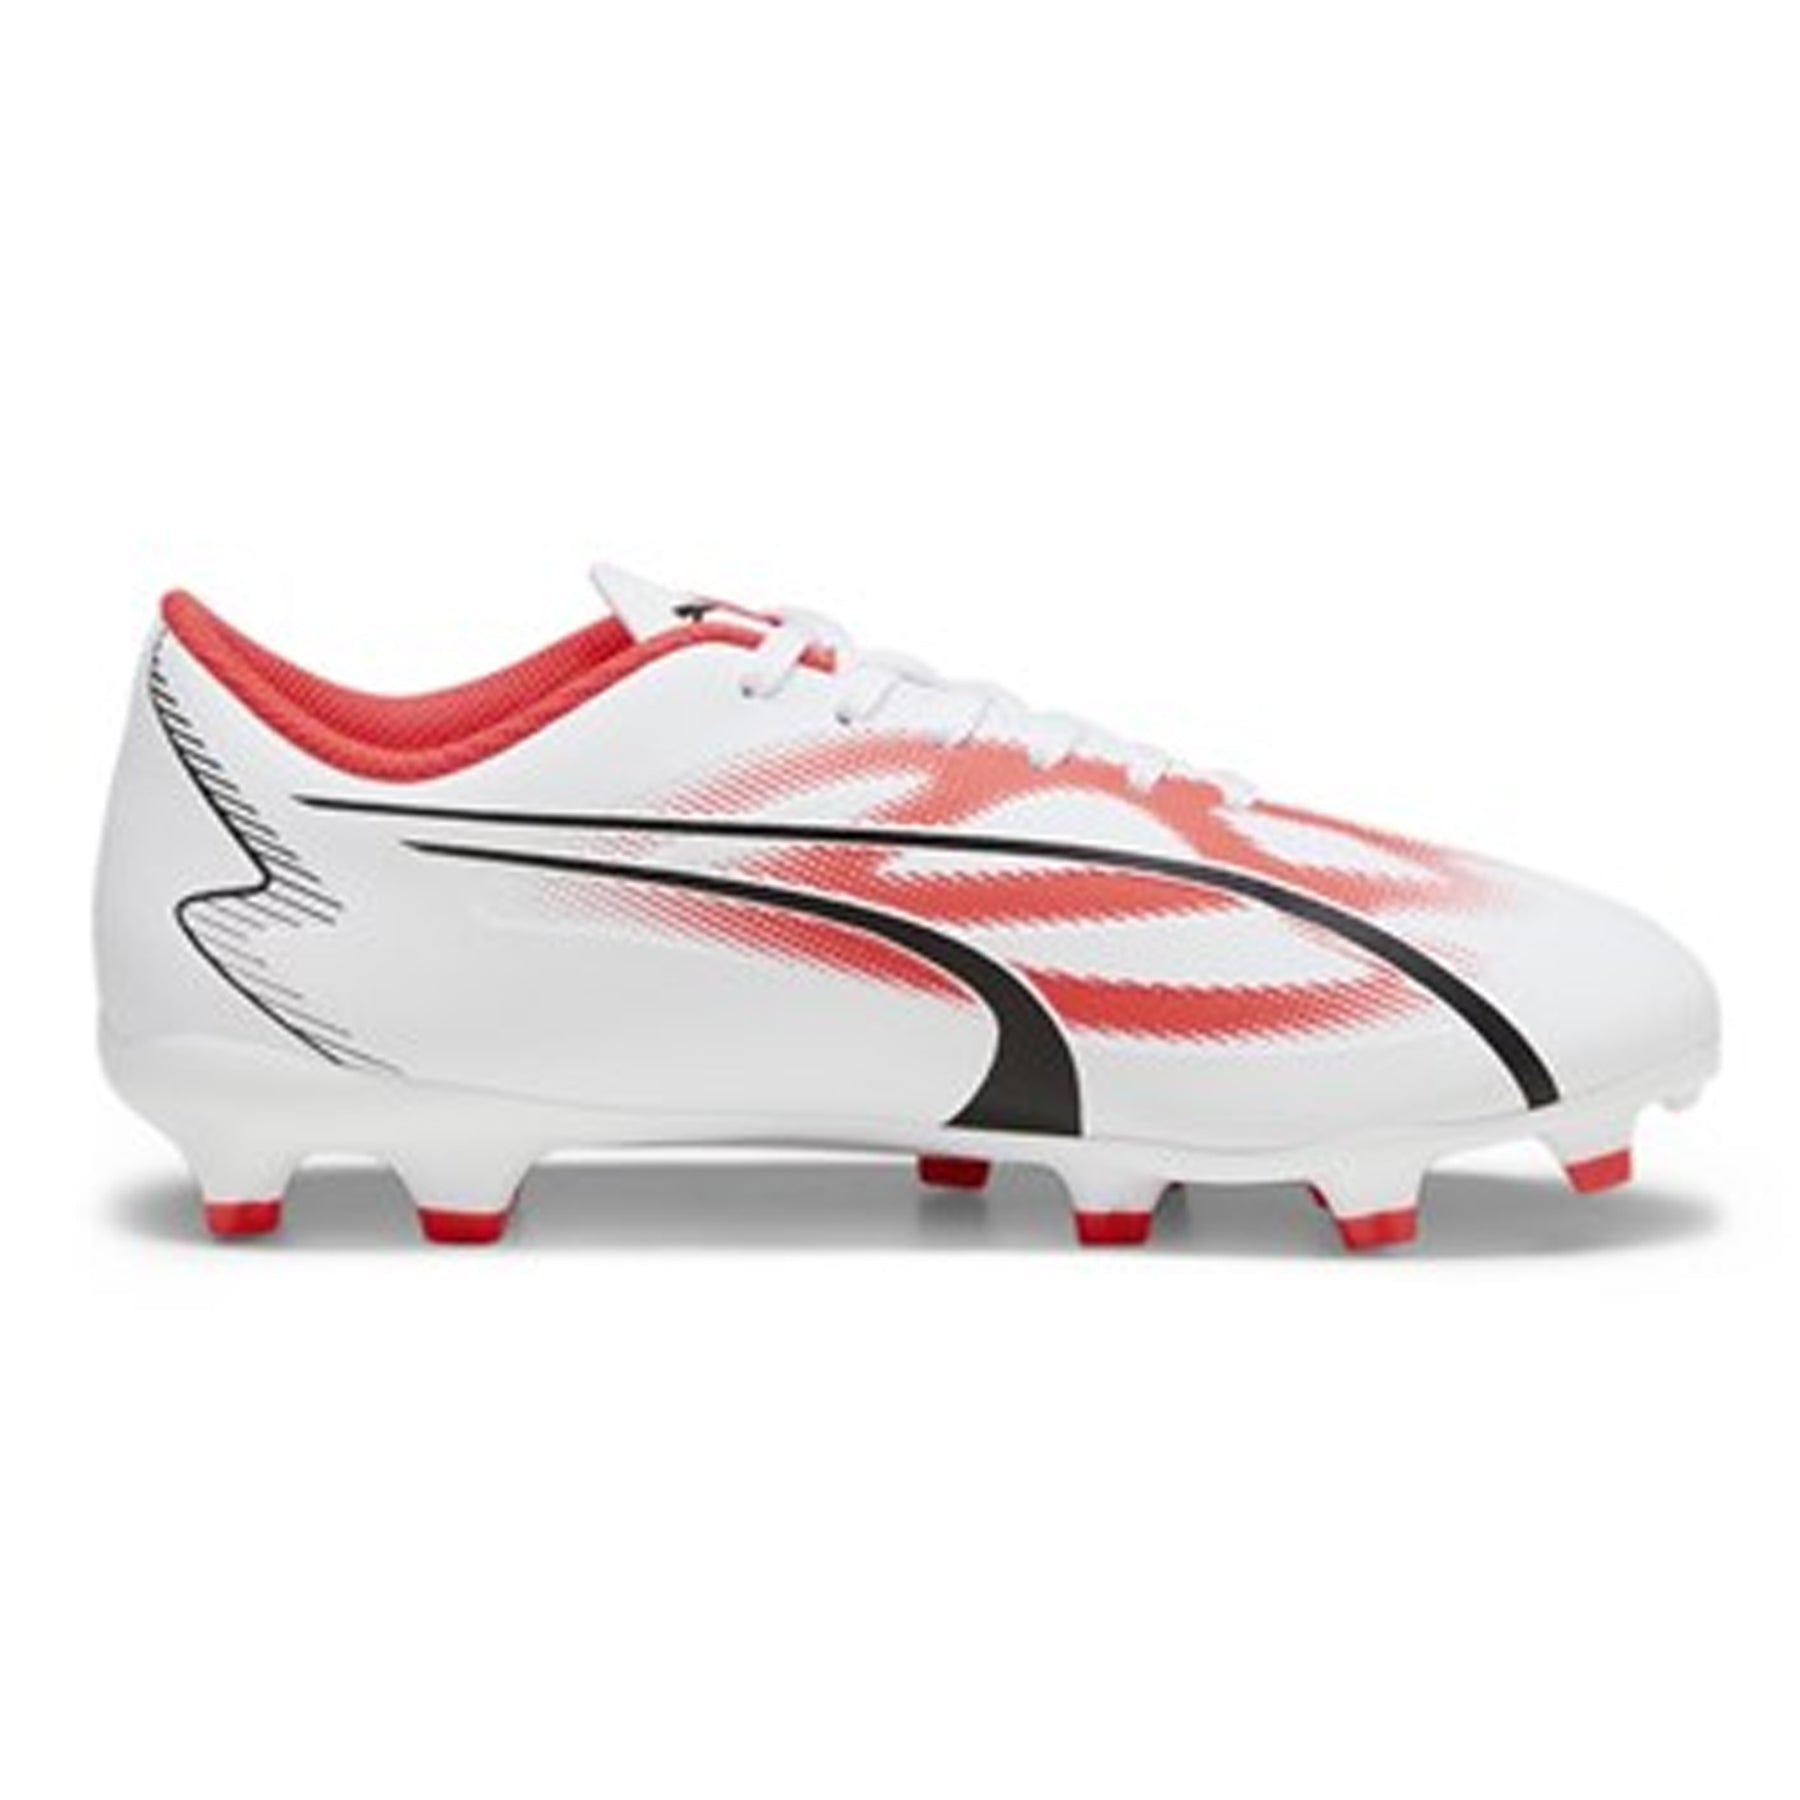 Puma Ultra Play FG Junior Football Boots: White/Fire Orchid